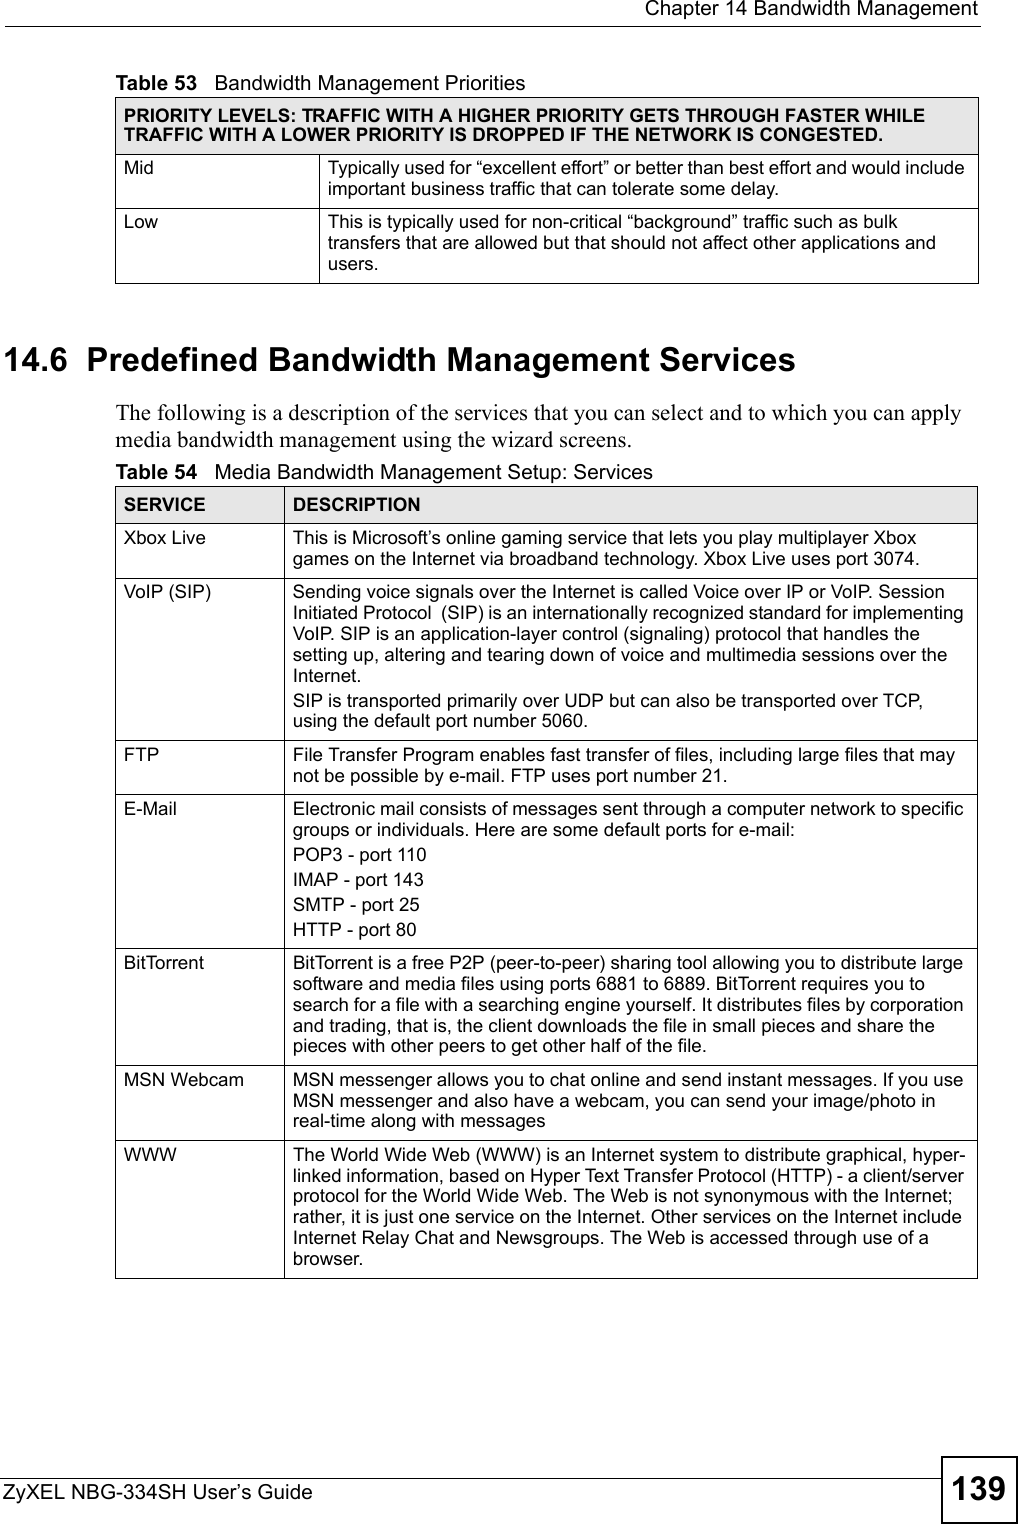  Chapter 14 Bandwidth ManagementZyXEL NBG-334SH User’s Guide 13914.6  Predefined Bandwidth Management ServicesThe following is a description of the services that you can select and to which you can apply media bandwidth management using the wizard screens. Mid  Typically used for “excellent effort” or better than best effort and would include important business traffic that can tolerate some delay.Low This is typically used for non-critical “background” traffic such as bulk transfers that are allowed but that should not affect other applications and users. Table 53   Bandwidth Management PrioritiesPRIORITY LEVELS: TRAFFIC WITH A HIGHER PRIORITY GETS THROUGH FASTER WHILE TRAFFIC WITH A LOWER PRIORITY IS DROPPED IF THE NETWORK IS CONGESTED.Table 54   Media Bandwidth Management Setup: ServicesSERVICE DESCRIPTIONXbox Live This is Microsoft’s online gaming service that lets you play multiplayer Xbox games on the Internet via broadband technology. Xbox Live uses port 3074.VoIP (SIP) Sending voice signals over the Internet is called Voice over IP or VoIP. Session Initiated Protocol  (SIP) is an internationally recognized standard for implementing VoIP. SIP is an application-layer control (signaling) protocol that handles the setting up, altering and tearing down of voice and multimedia sessions over the Internet.SIP is transported primarily over UDP but can also be transported over TCP, using the default port number 5060. FTP File Transfer Program enables fast transfer of files, including large files that may not be possible by e-mail. FTP uses port number 21.E-Mail Electronic mail consists of messages sent through a computer network to specific groups or individuals. Here are some default ports for e-mail: POP3 - port 110IMAP - port 143SMTP - port 25HTTP - port 80BitTorrent BitTorrent is a free P2P (peer-to-peer) sharing tool allowing you to distribute large software and media files using ports 6881 to 6889. BitTorrent requires you to search for a file with a searching engine yourself. It distributes files by corporation and trading, that is, the client downloads the file in small pieces and share the pieces with other peers to get other half of the file.MSN Webcam MSN messenger allows you to chat online and send instant messages. If you use MSN messenger and also have a webcam, you can send your image/photo in real-time along with messagesWWW The World Wide Web (WWW) is an Internet system to distribute graphical, hyper-linked information, based on Hyper Text Transfer Protocol (HTTP) - a client/server protocol for the World Wide Web. The Web is not synonymous with the Internet; rather, it is just one service on the Internet. Other services on the Internet include Internet Relay Chat and Newsgroups. The Web is accessed through use of a browser.